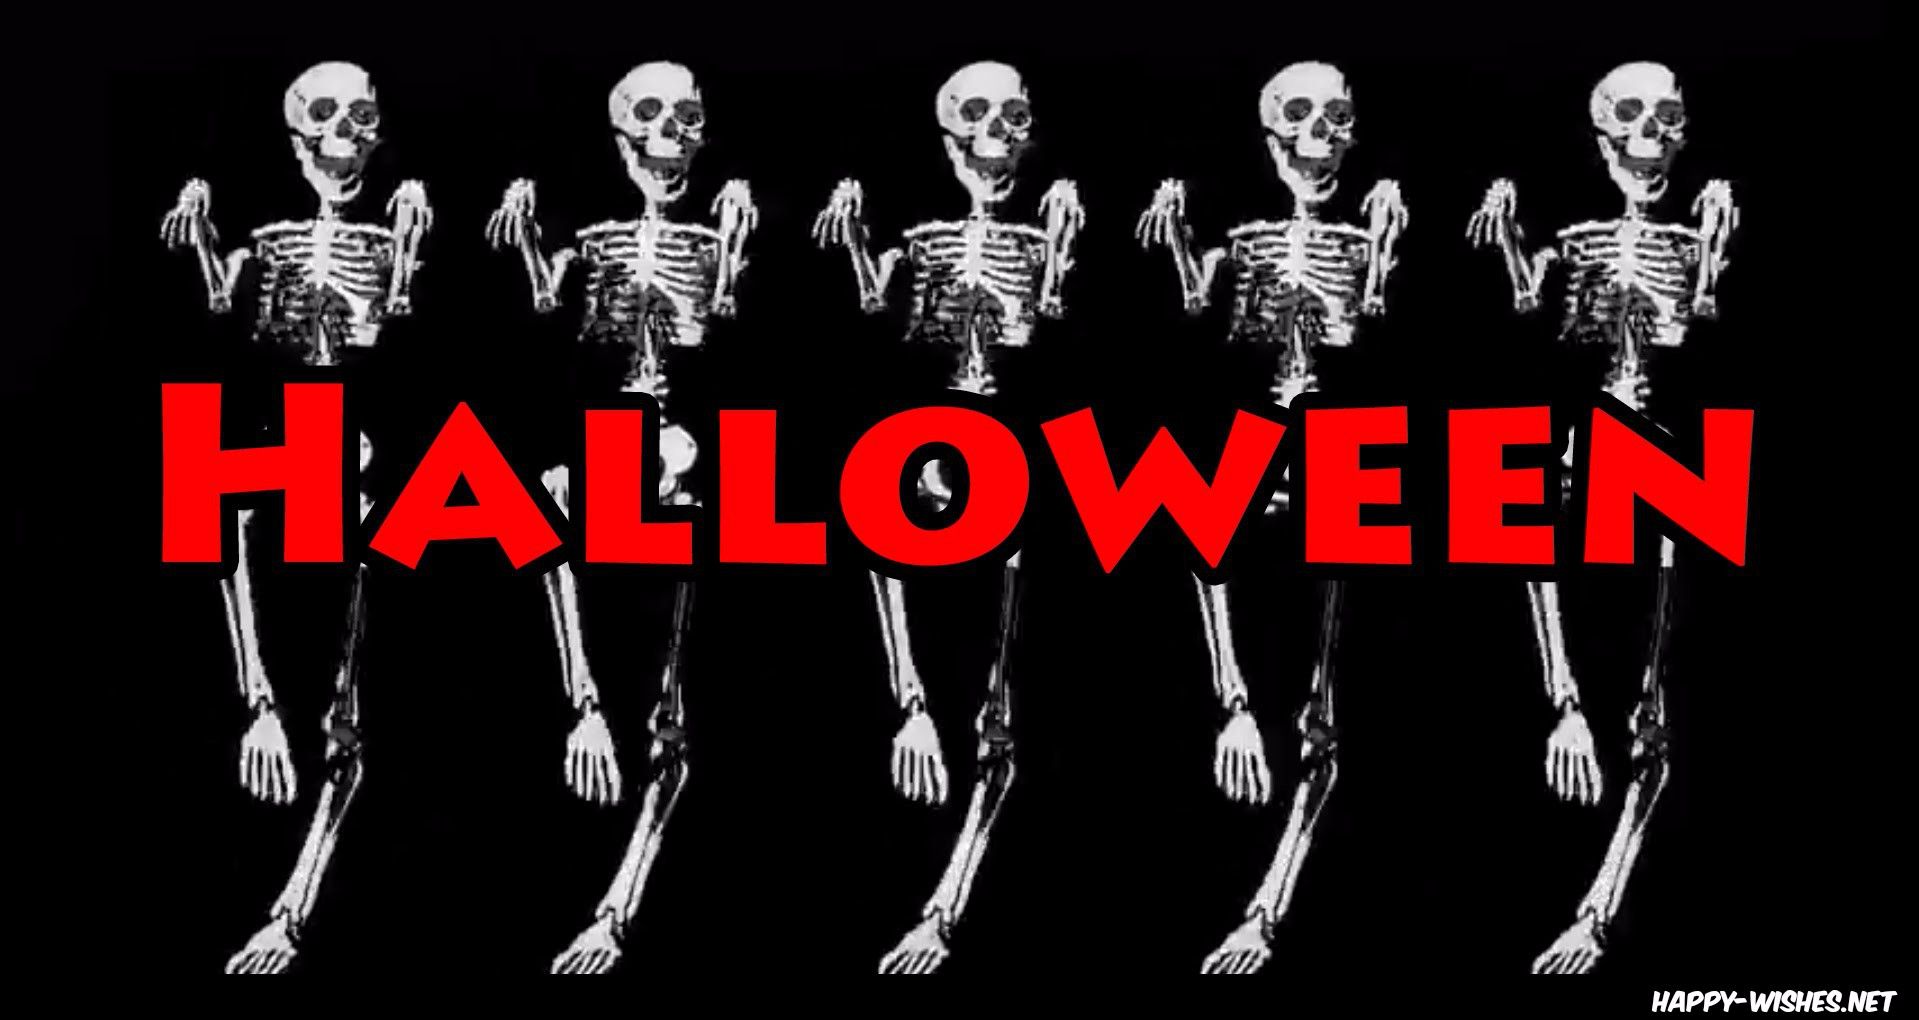 Happy Halloween Skeleton Images - Funny & Scary